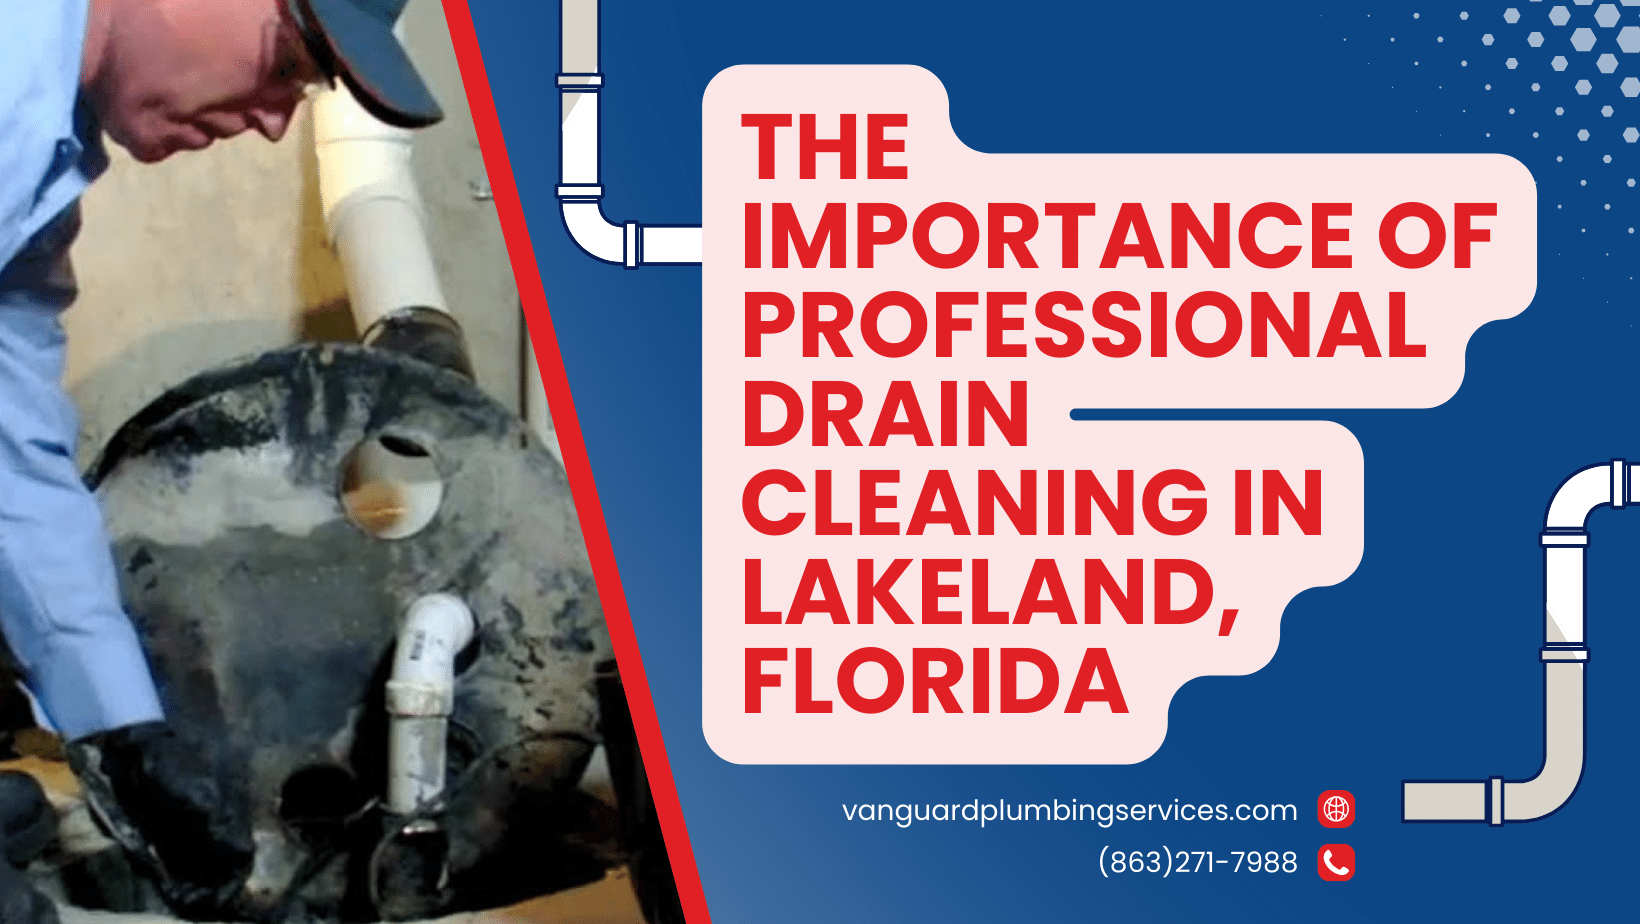 The Importance of Professional Drain Cleaning in Lakeland, Florida